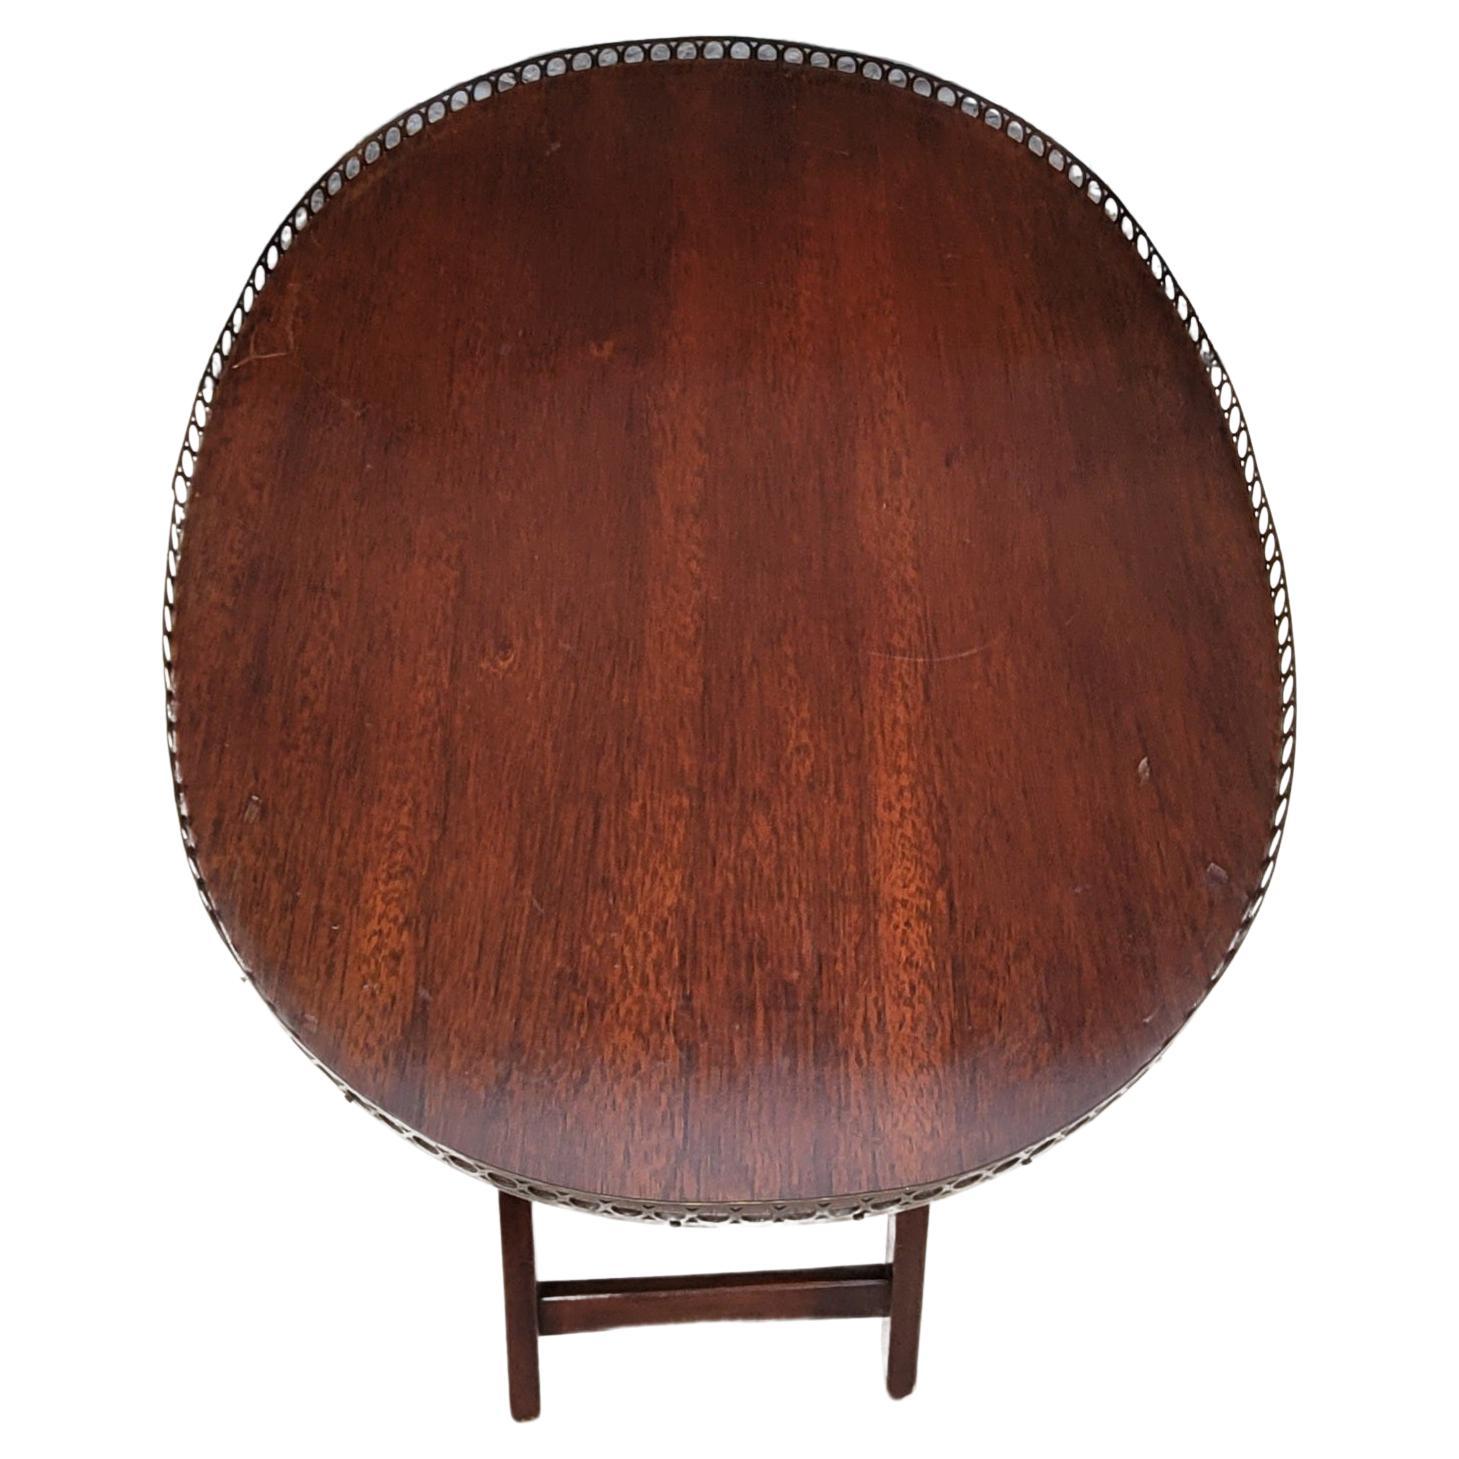 Woodwork Mid-Century George III Style Mahogany Folding Tray Table w/ Gallery, Circa 1950s For Sale